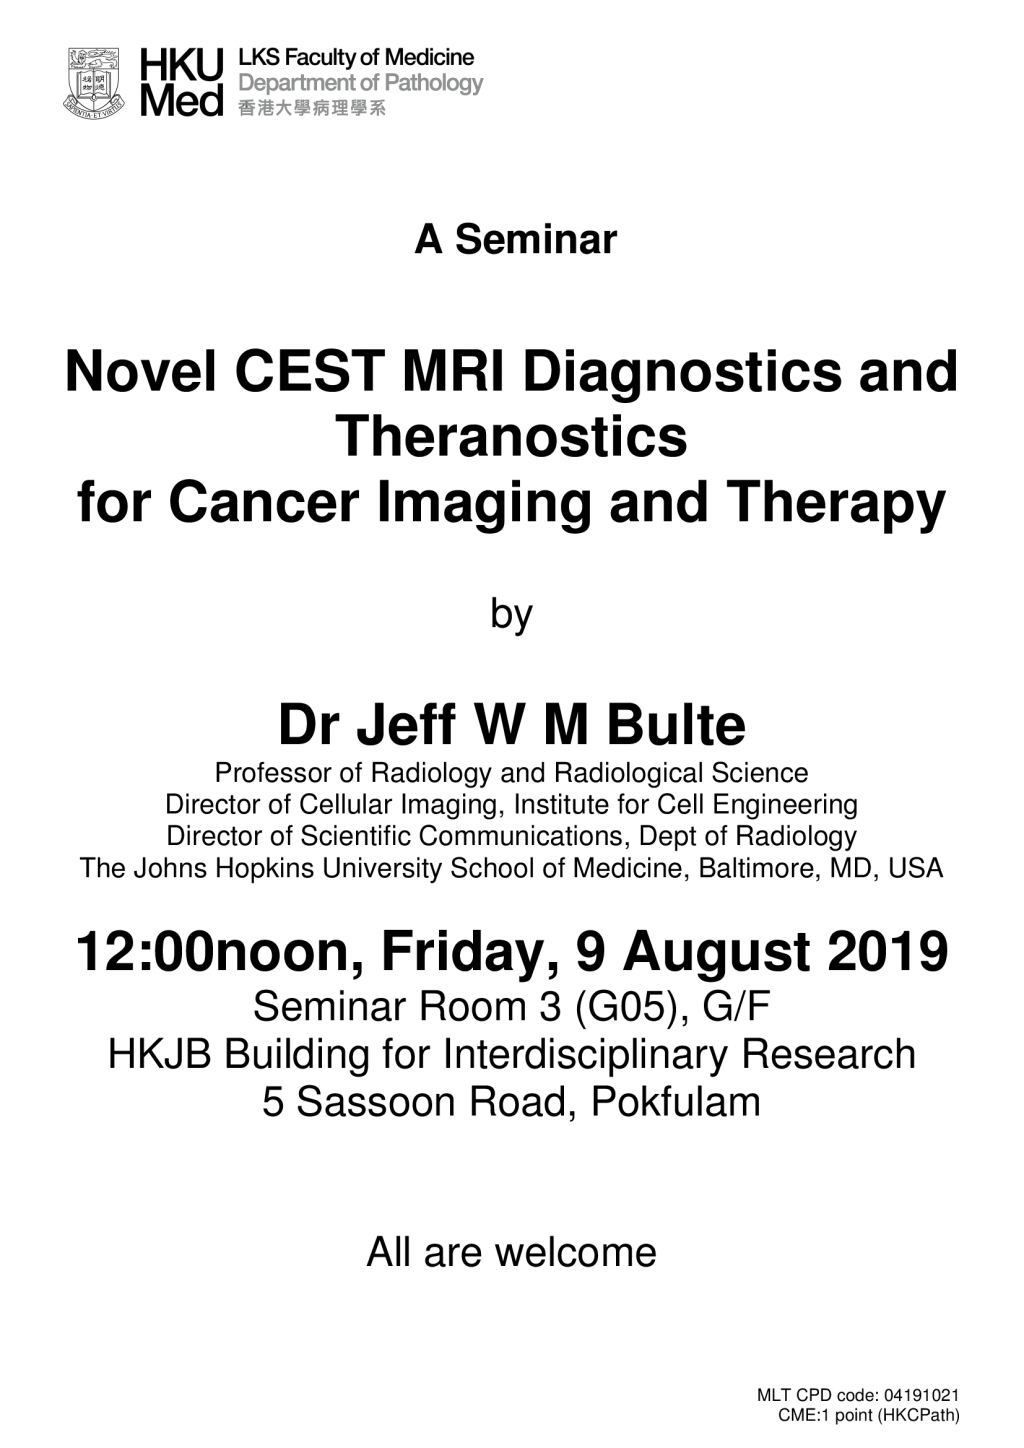 A seminar by Dr Jeff Bulte on 9 August (12noon)